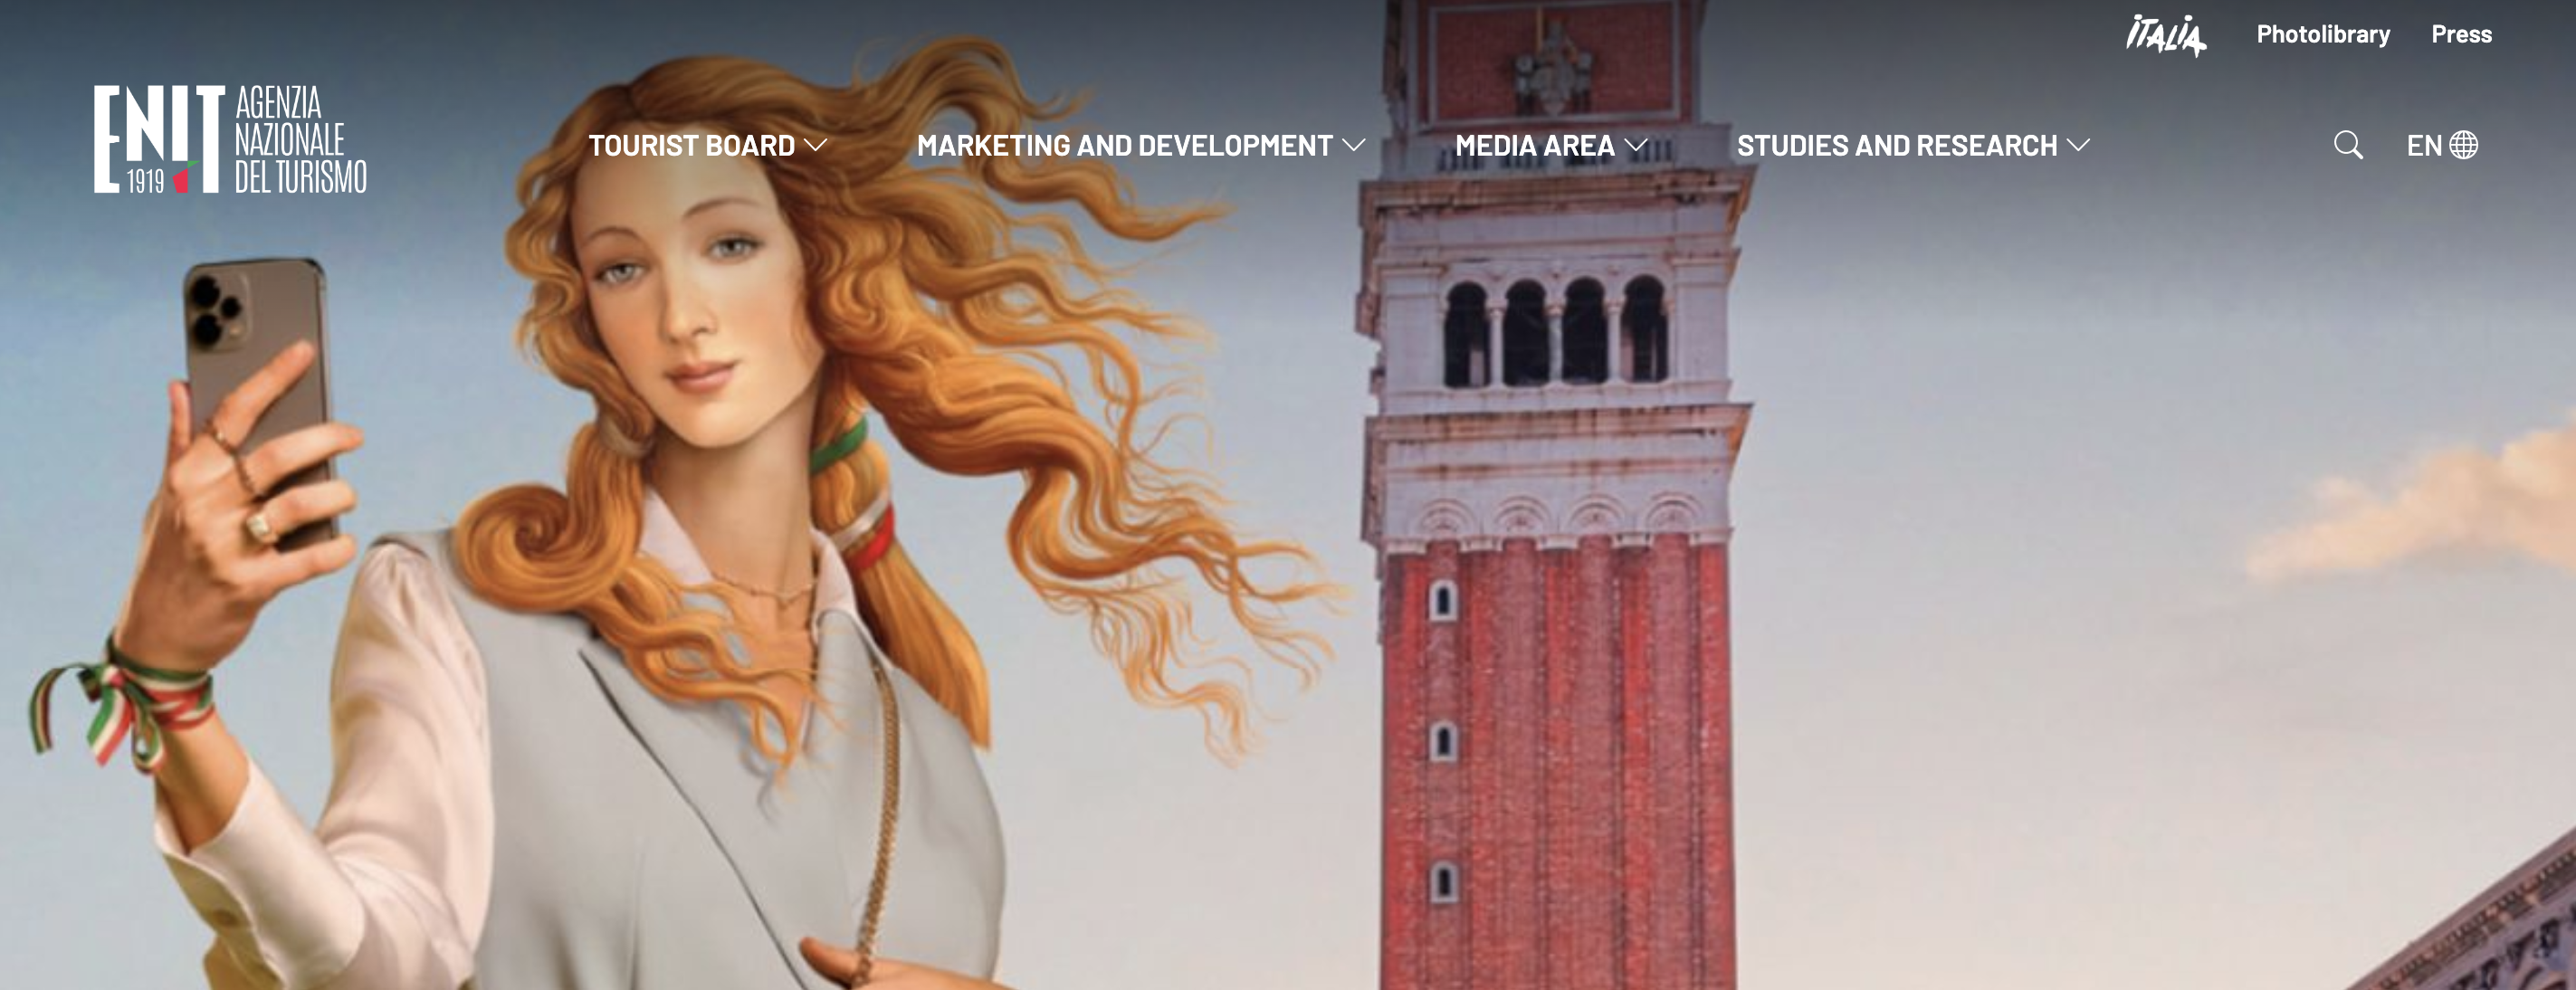 Case study featured image for Enhancing ENIT's brand awareness for Italy as a tourist destination